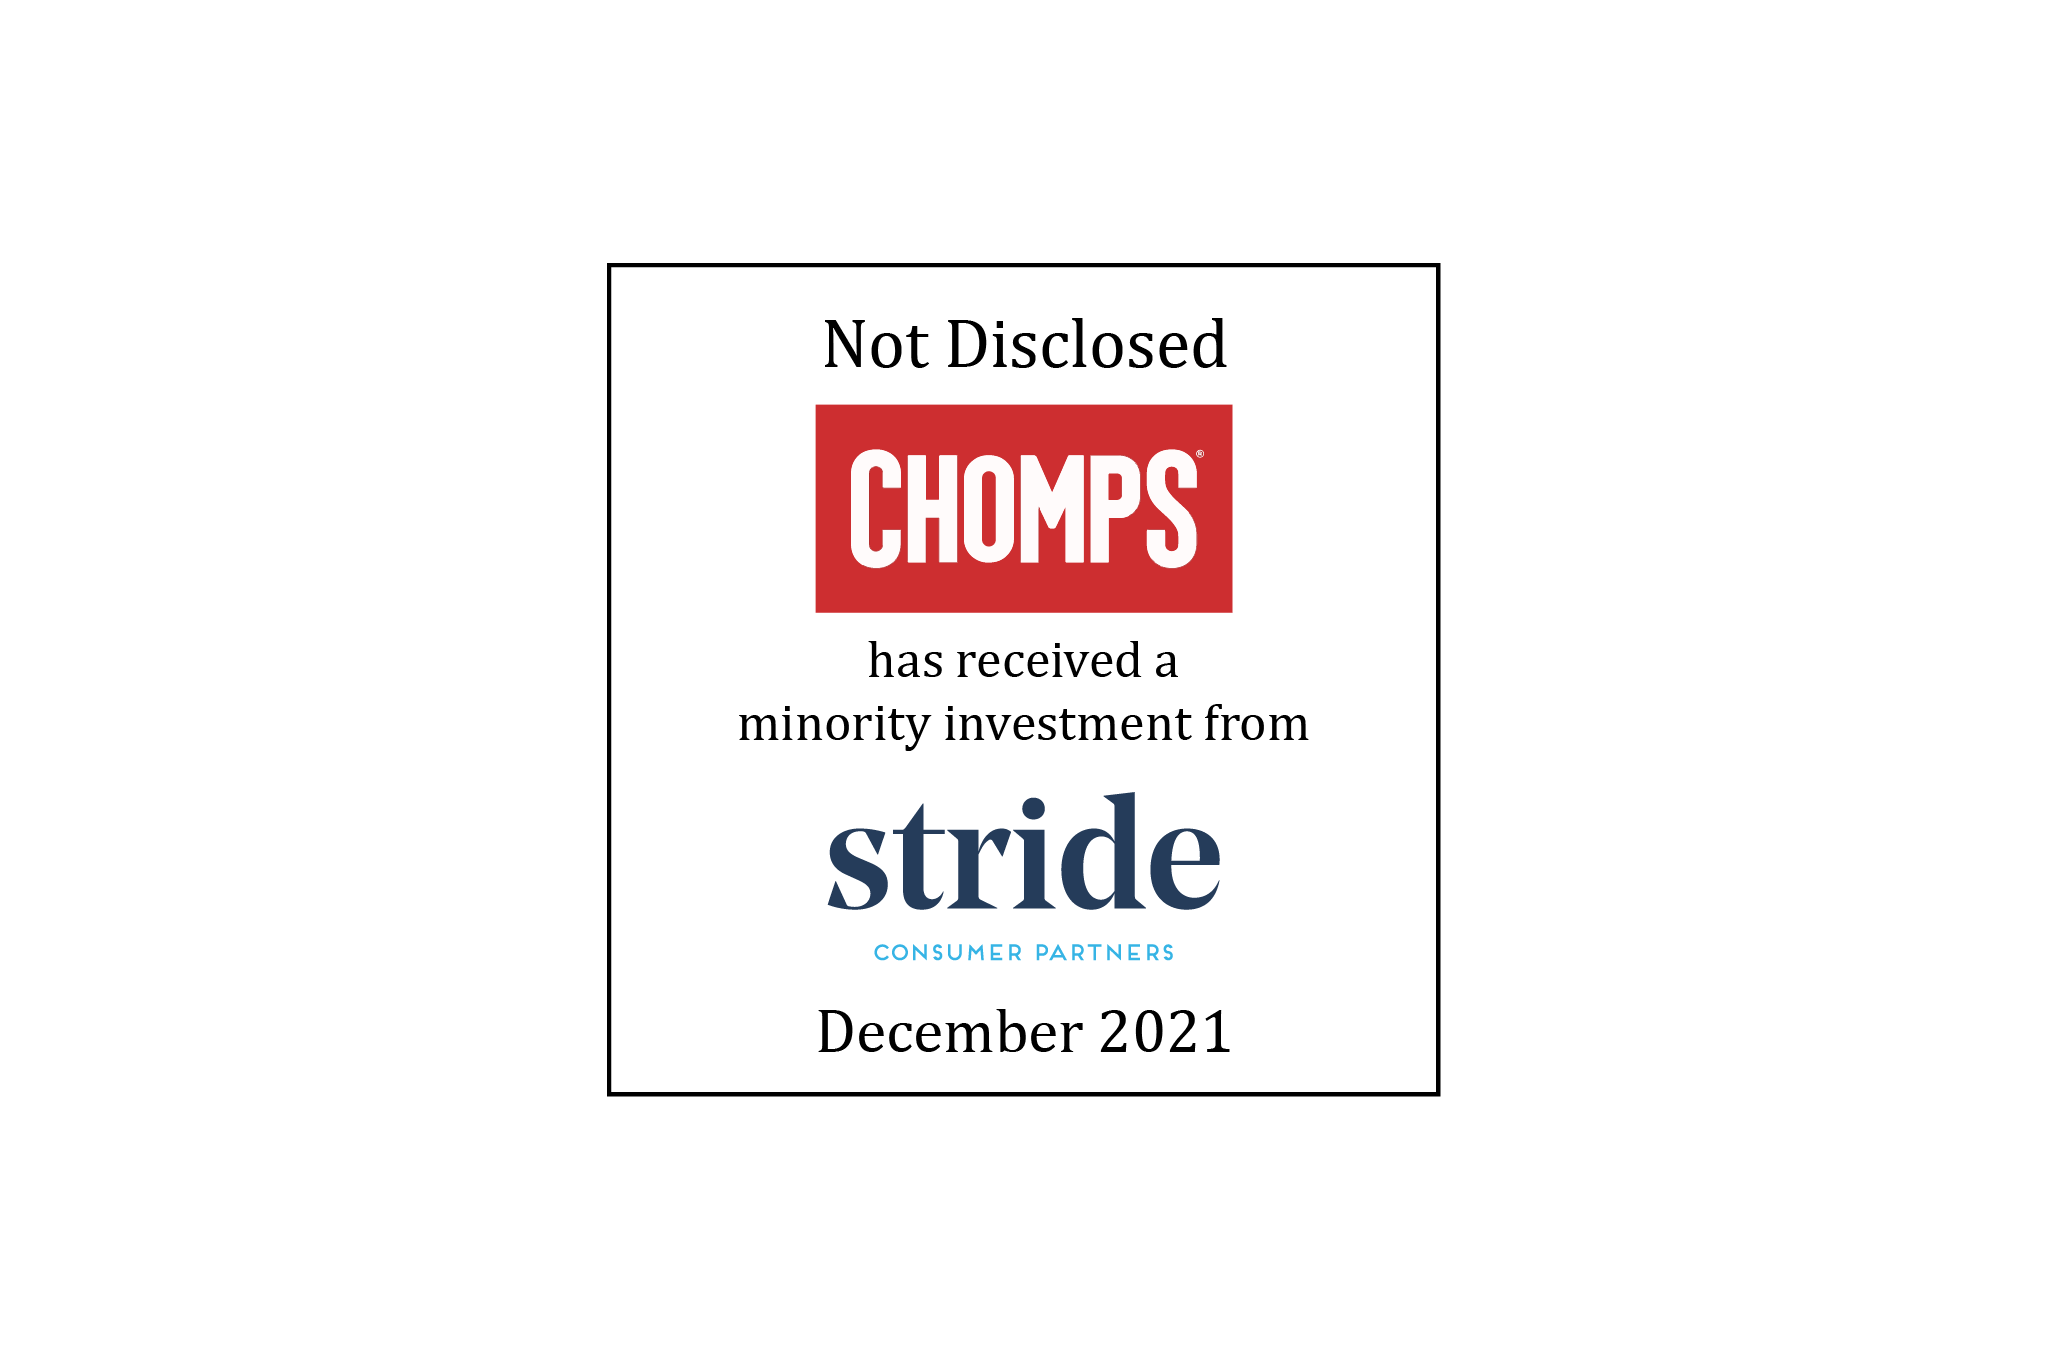 Chomps/Stride tombstone